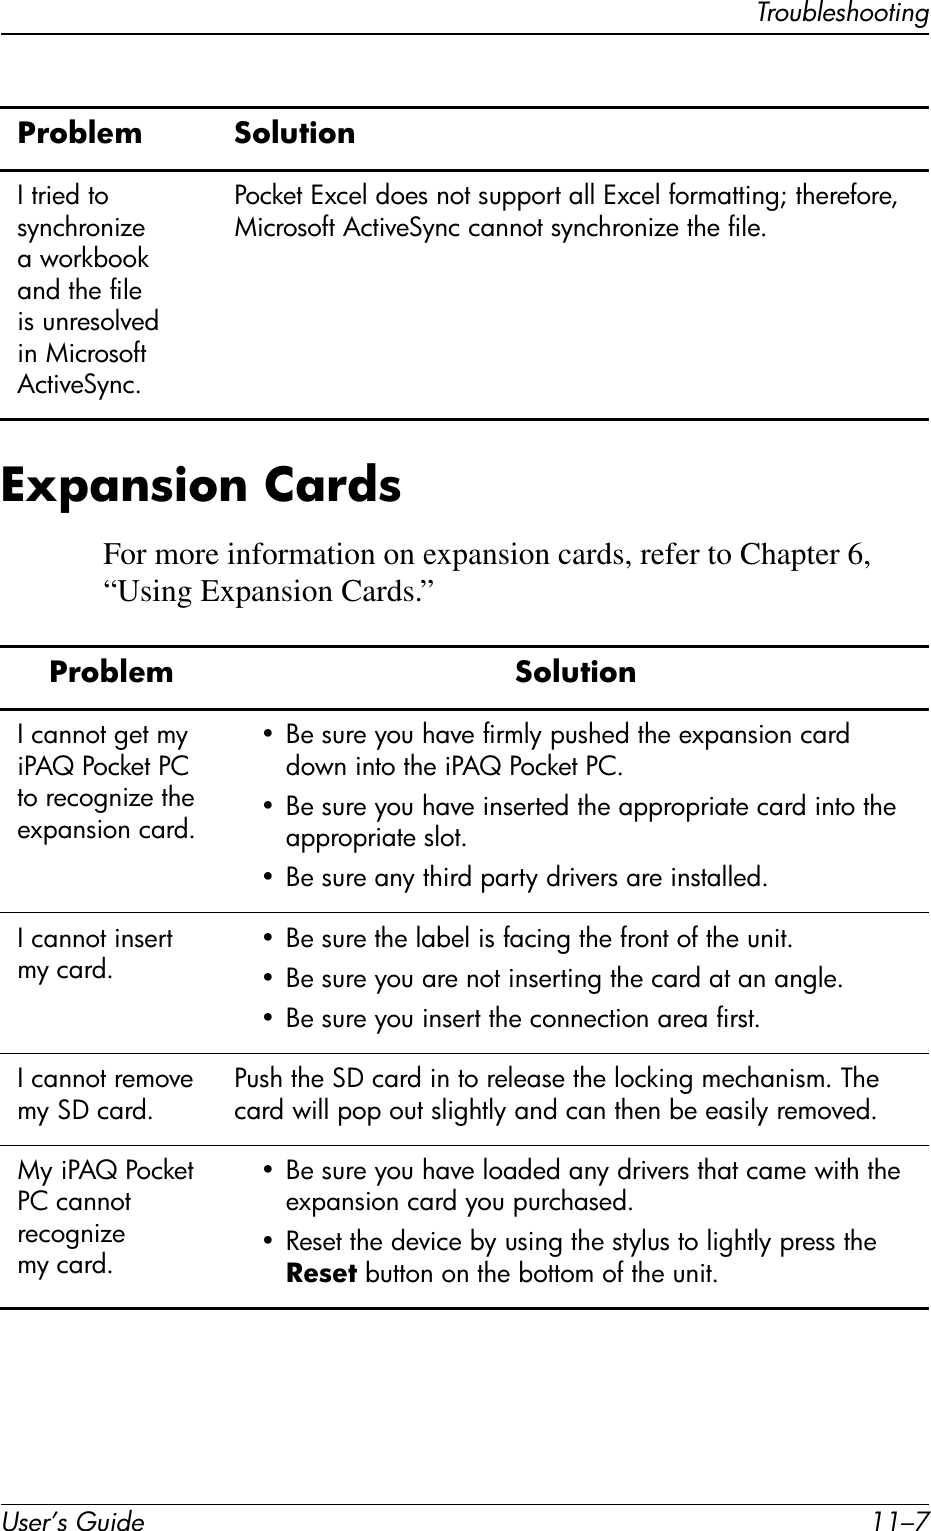 TroubleshootingUser’s Guide 11–7Expansion CardsFor more information on expansion cards, refer to Chapter 6, “Using Expansion Cards.”I tried to synchronize a workbook and the file is unresolved in Microsoft ActiveSync.Pocket Excel does not support all Excel formatting; therefore, Microsoft ActiveSync cannot synchronize the file.Problem SolutionProblem SolutionI cannot get my iPAQ Pocket PC to recognize the expansion card.• Be sure you have firmly pushed the expansion card down into the iPAQ Pocket PC. • Be sure you have inserted the appropriate card into the appropriate slot.• Be sure any third party drivers are installed.I cannot insert my card.• Be sure the label is facing the front of the unit.• Be sure you are not inserting the card at an angle.• Be sure you insert the connection area first.I cannot remove my SD card.Push the SD card in to release the locking mechanism. The card will pop out slightly and can then be easily removed.My iPAQ Pocket PC cannot recognize my card.• Be sure you have loaded any drivers that came with the expansion card you purchased.• Reset the device by using the stylus to lightly press the Reset button on the bottom of the unit.